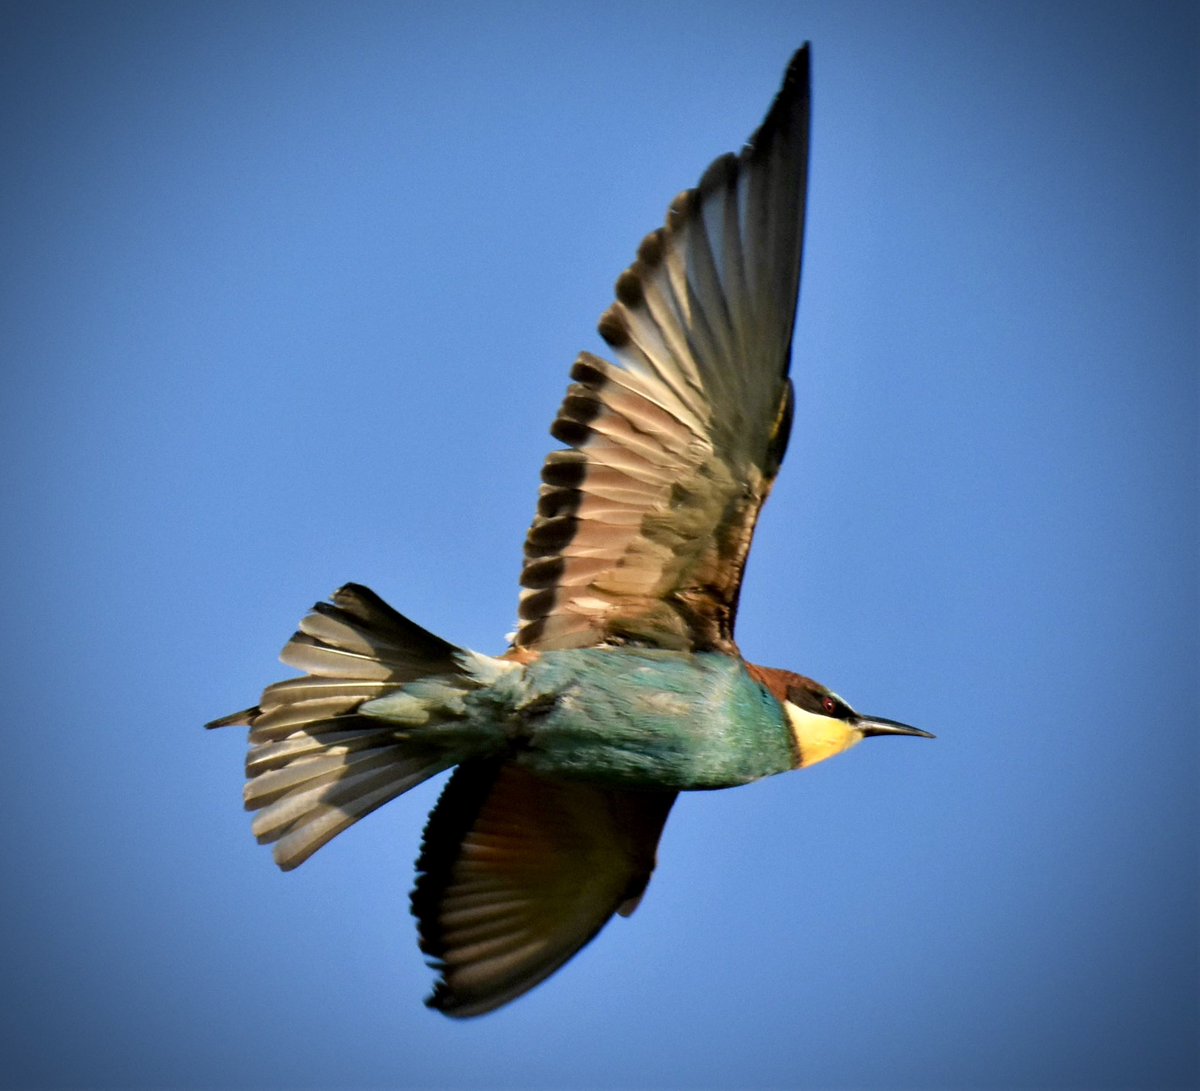 The Norfolk Bee-Eaters came to visit Lincolnshire a few weeks ago! This once in a lifetime shot taken near Skegness in the early morning! The most stunning bird I have ever seen in the UK. @BBCSpringwatch @ChrisGPackham @michaelastracha @WildlifeMag @Natures_Voice